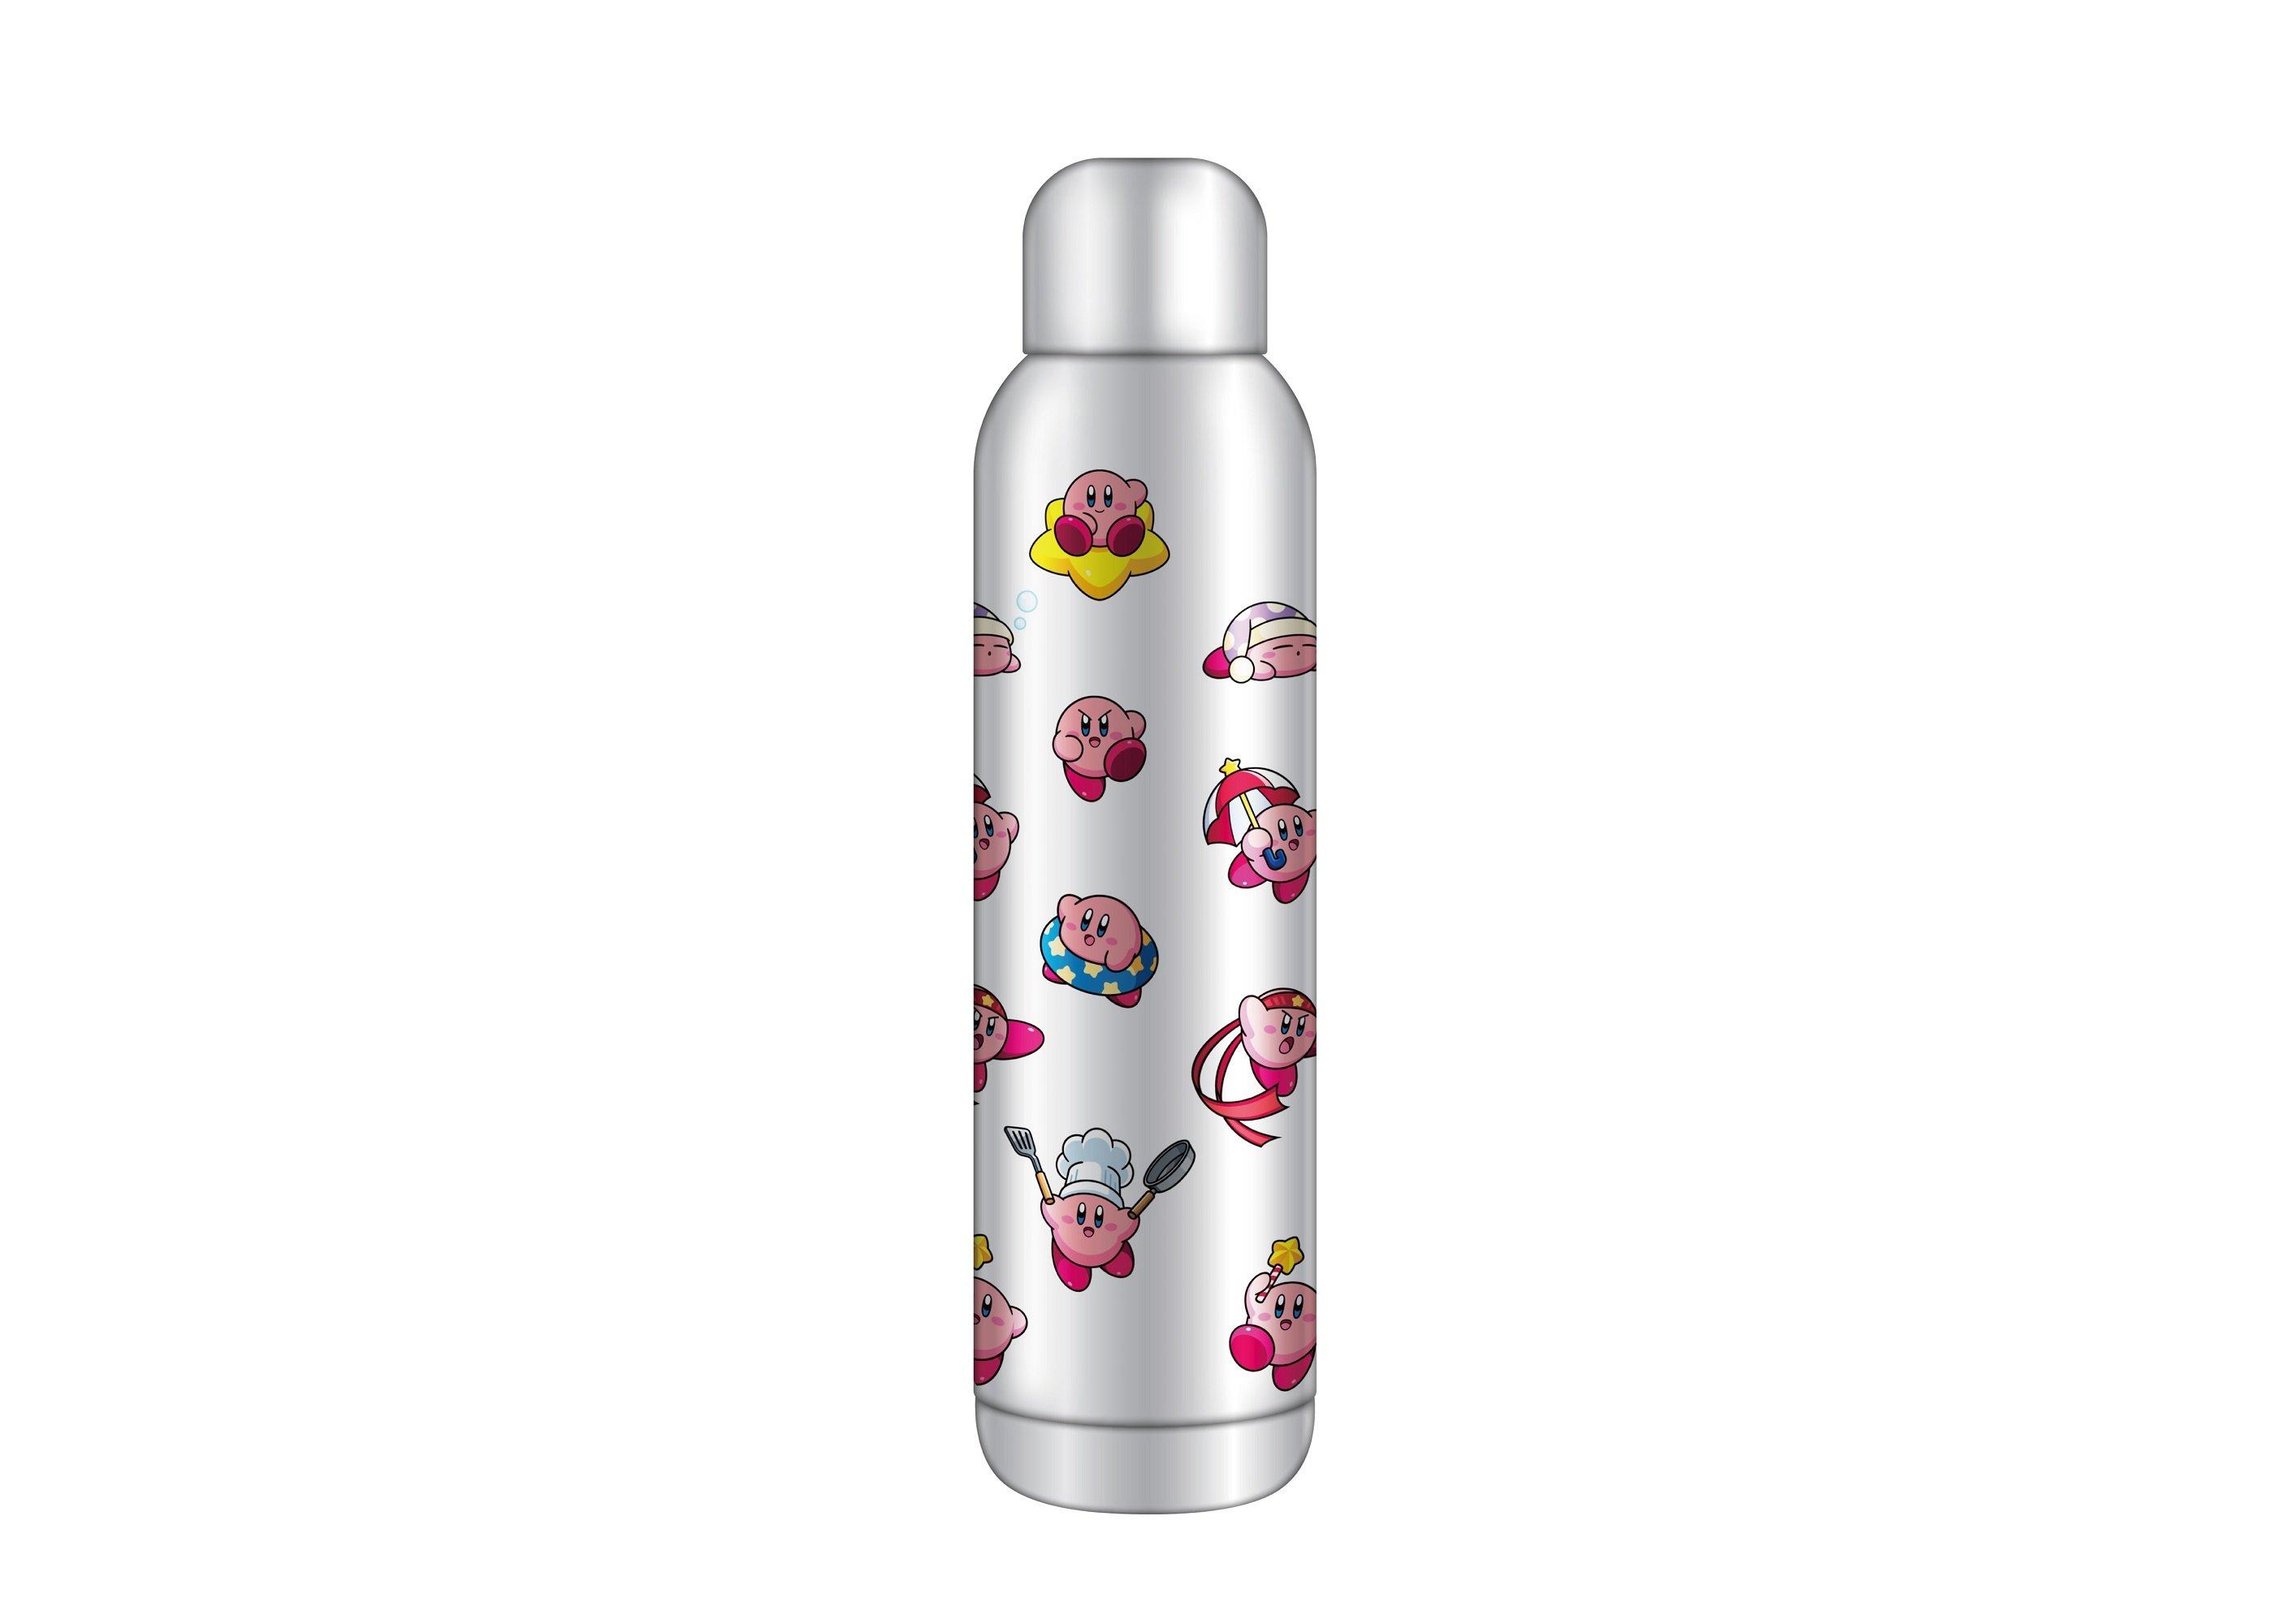 https://media.gamestop.com/i/gamestop/20008121/Kirby-Classic-Video-Game-All-Over-Print-22-oz-Stainless-Steel-Water-Bottle